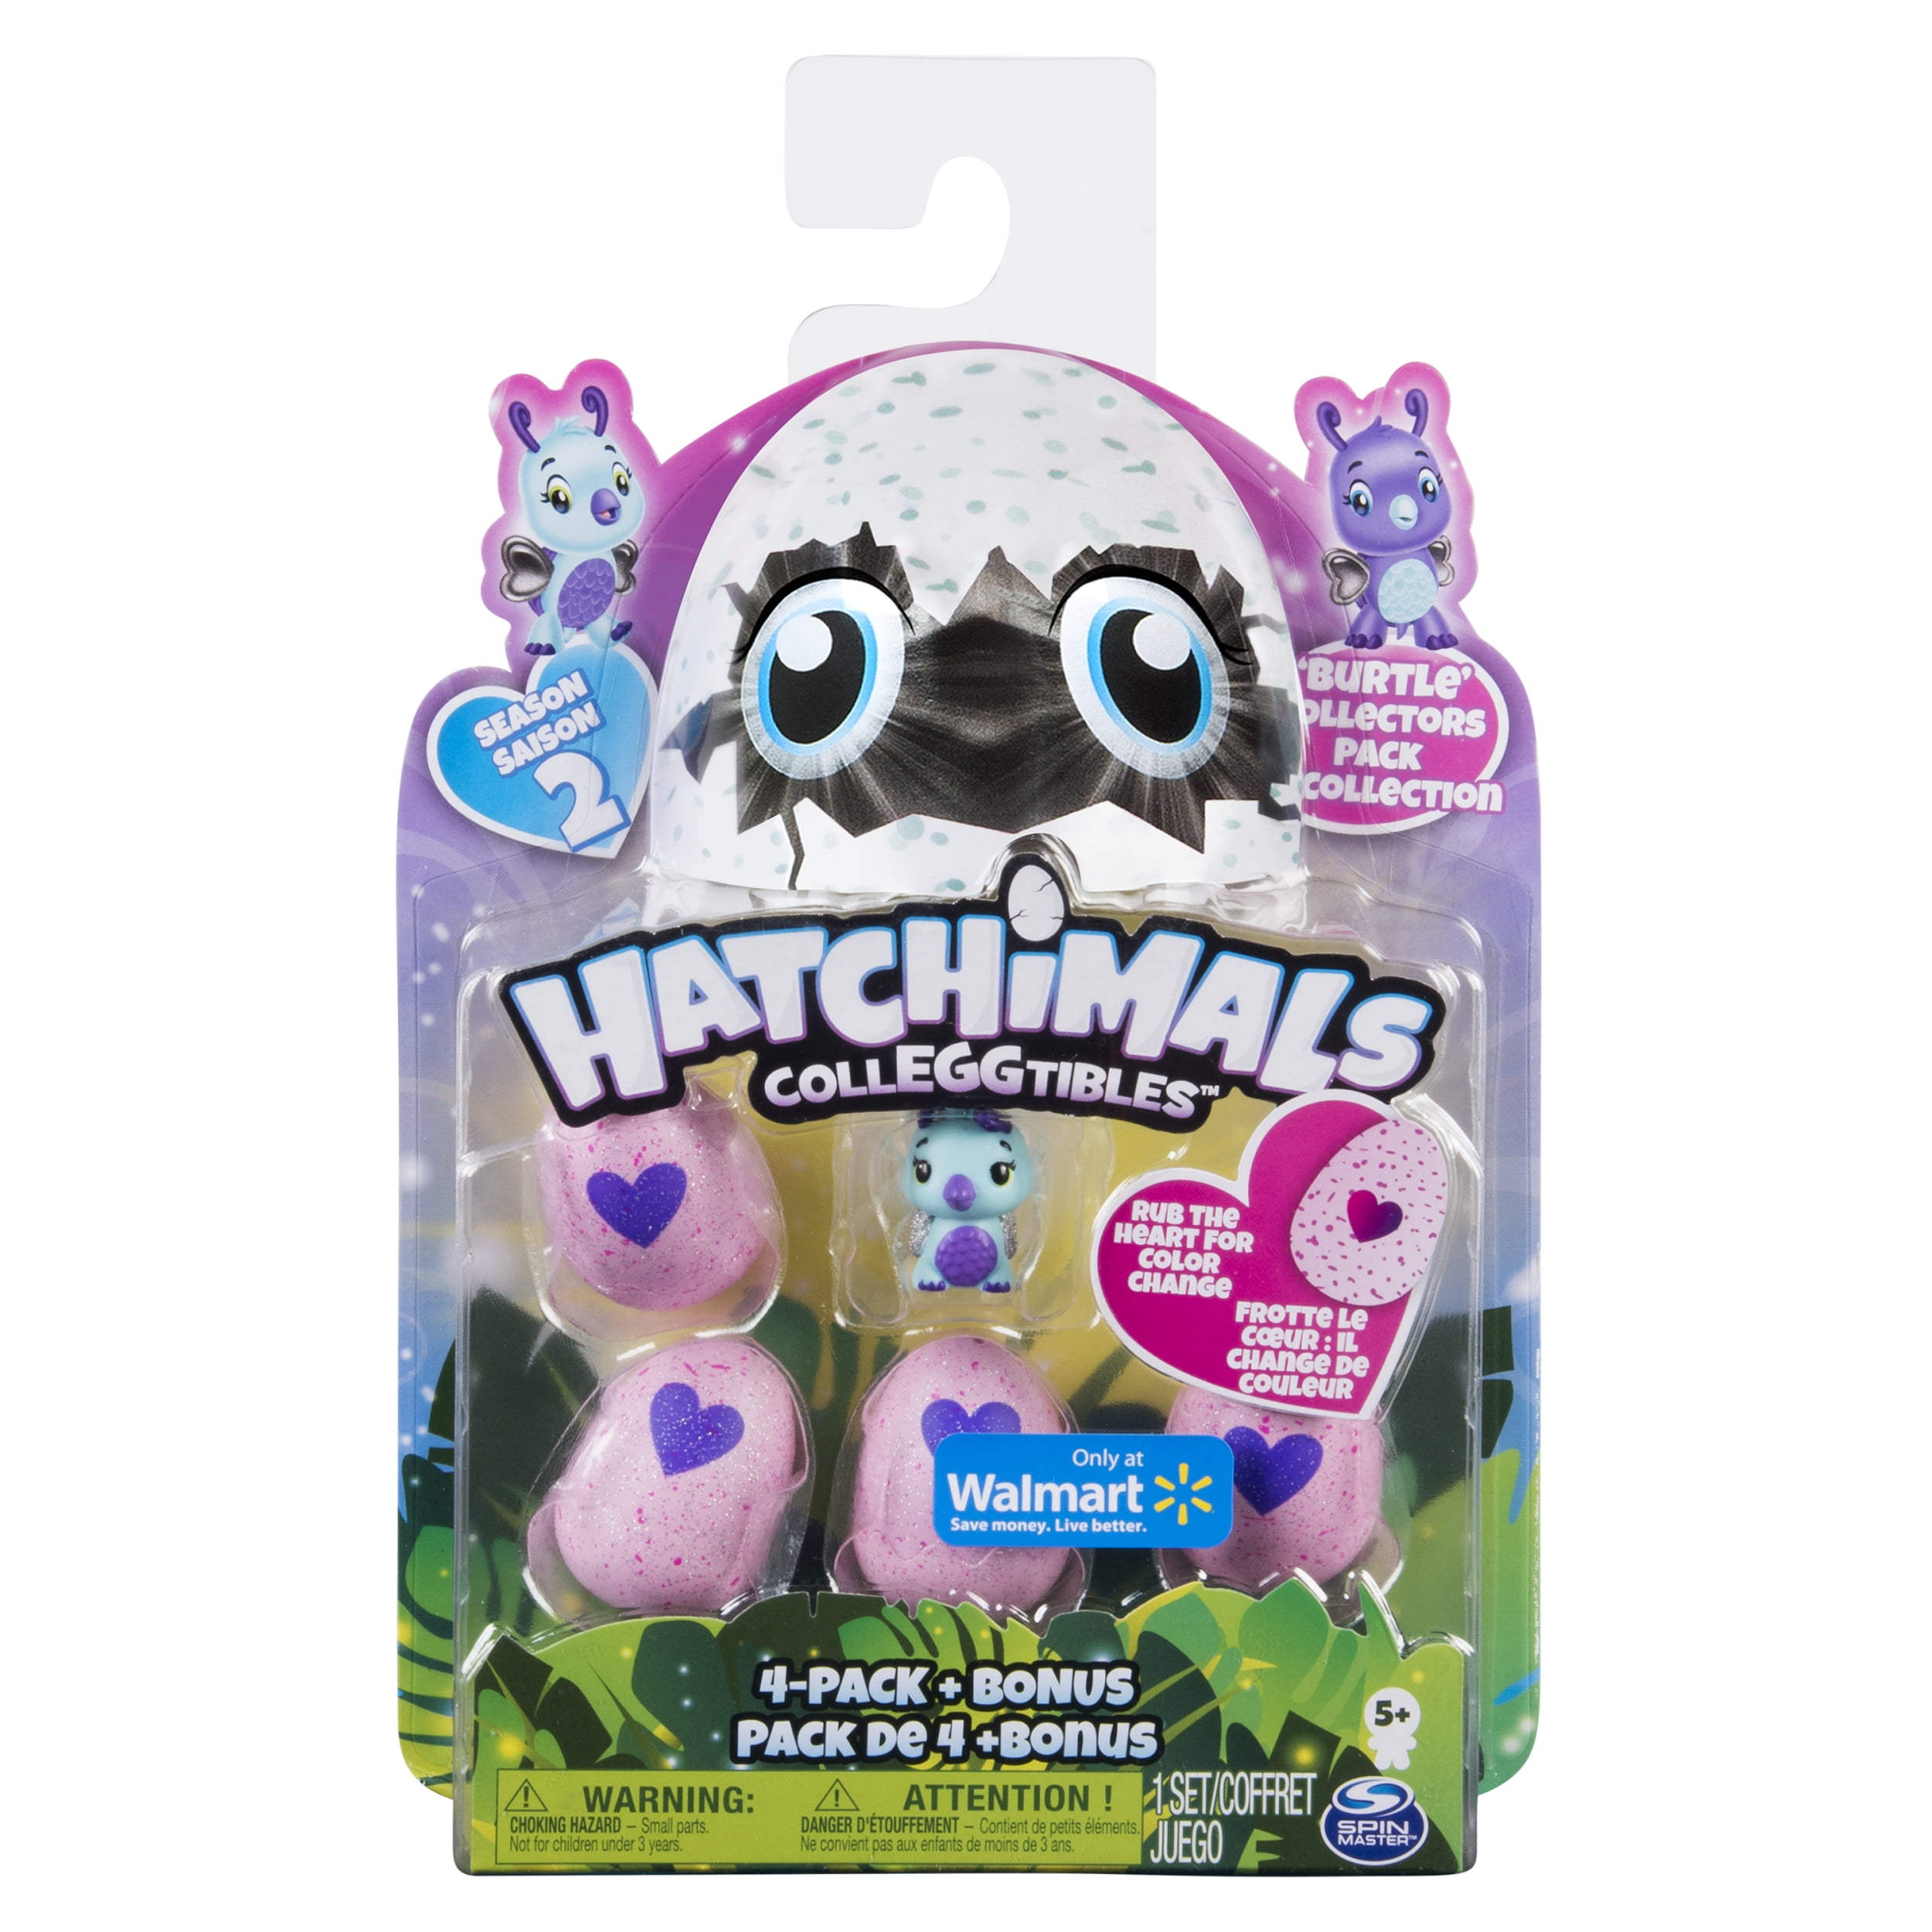 BN Kids Children Hatchimals Colleggtibles With Nest 2 Pack Toys Fast Delivery 